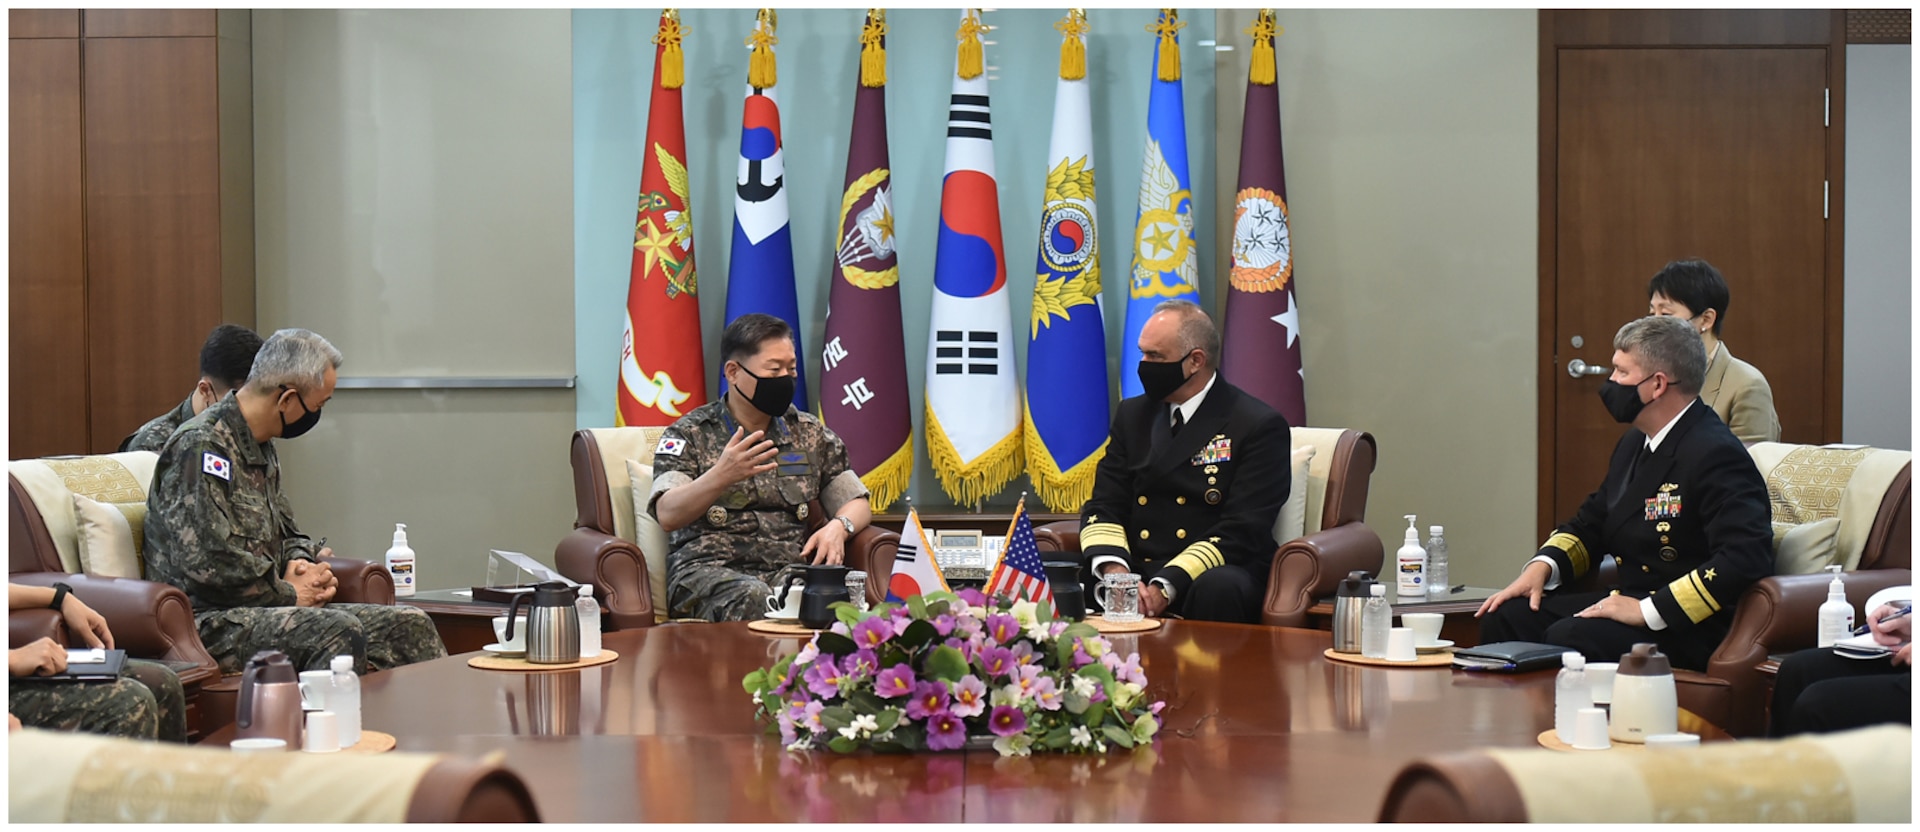 Adm. Richard meets with ROK Chairman of Joint Chiefs of Staff, Minister of Defense, and other ROK Commanders. Through the ironclad alliance with the ROK, the parties discussed ways to enhance the already strong deterrence posture and support ROK allies on the Korean Peninsula.